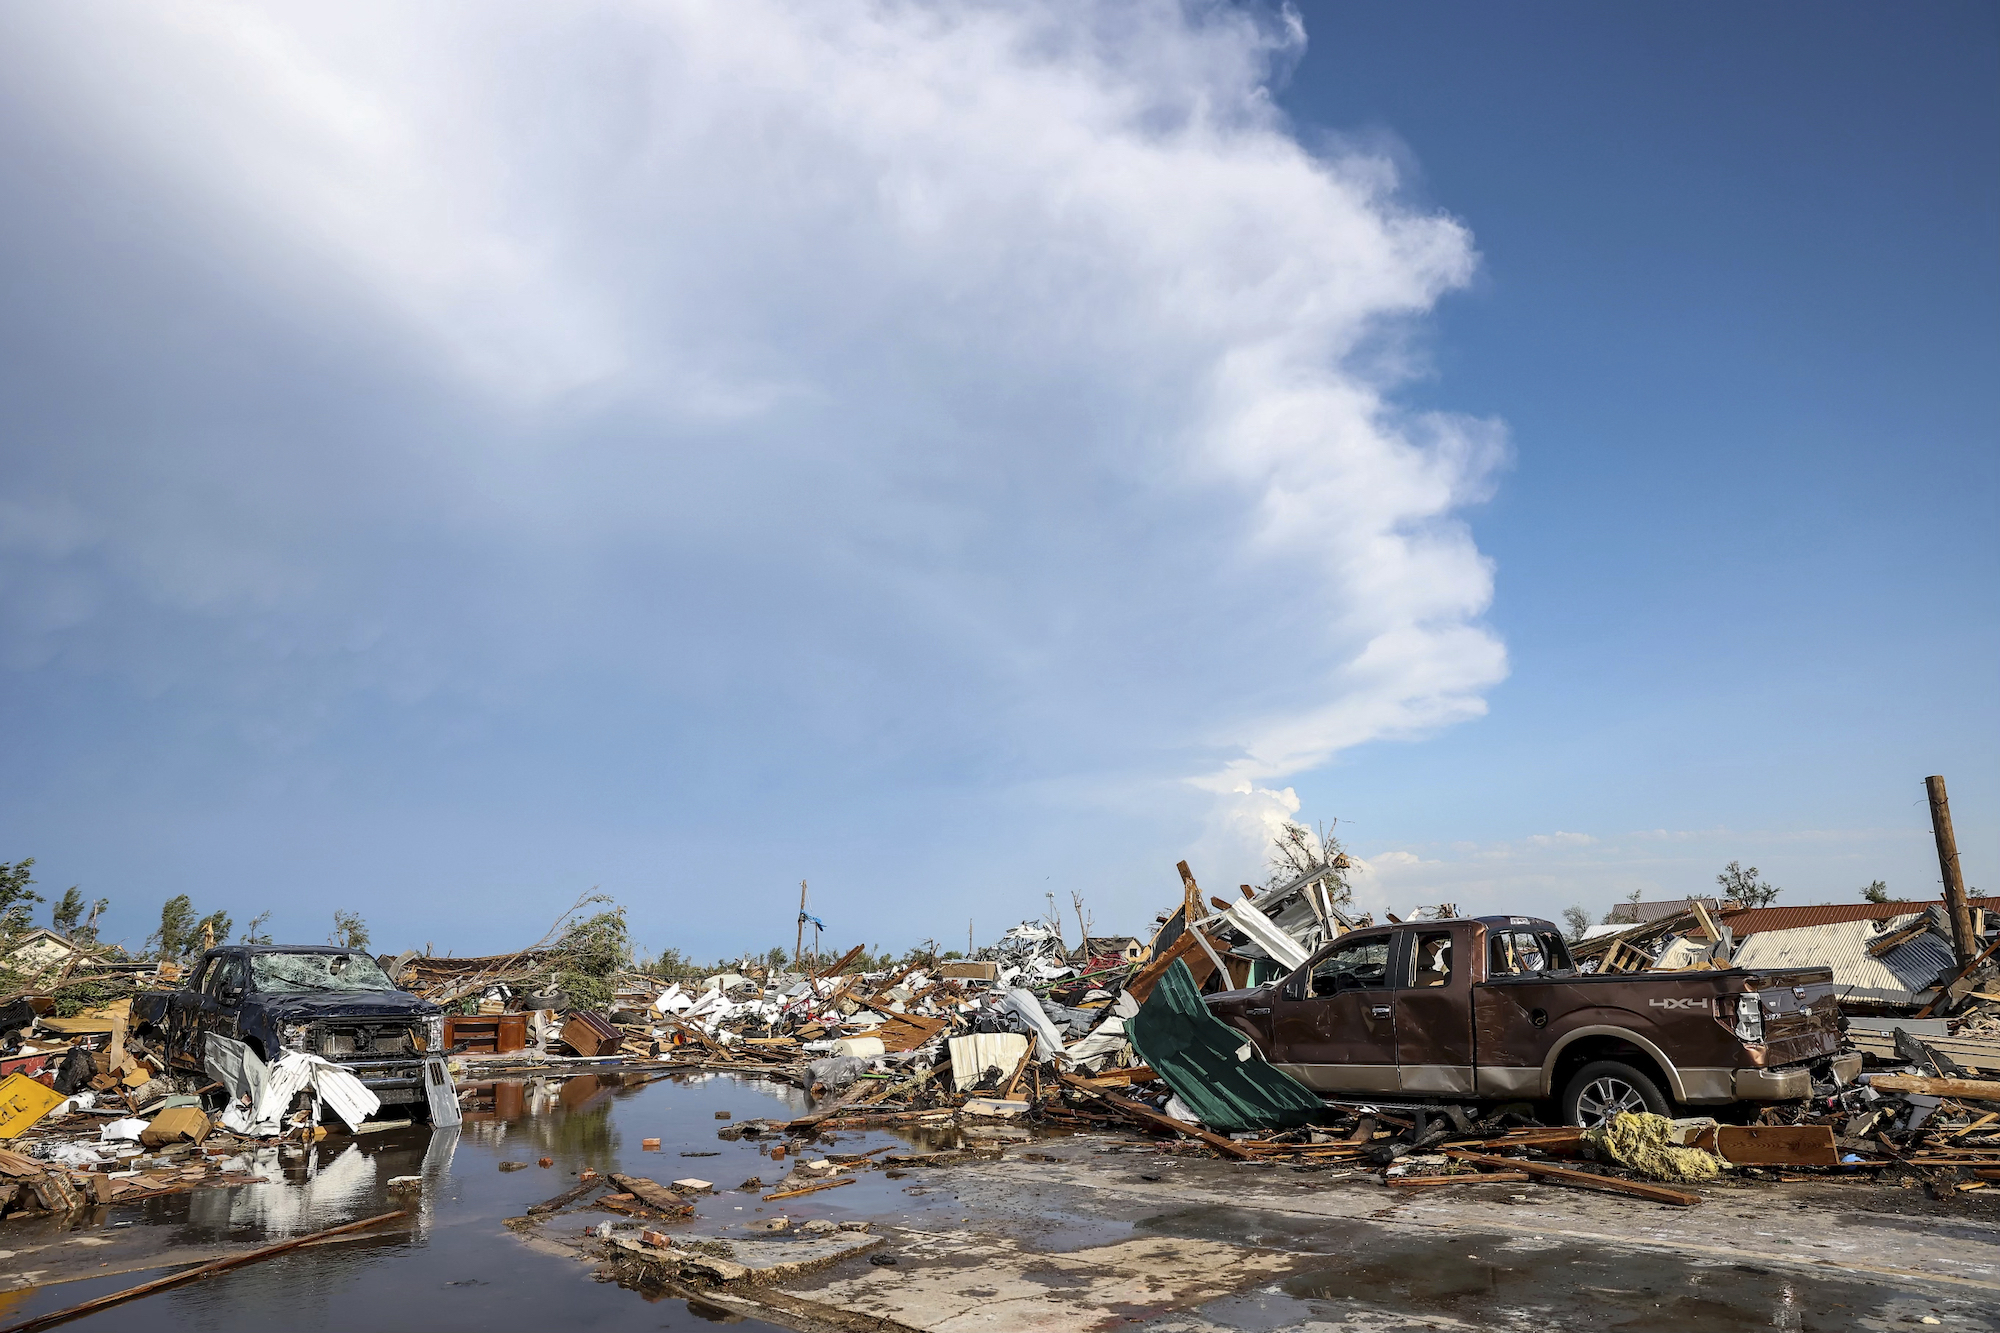 Damaged pickup trucks sit among debris after a tornado passed through a residential area in Perryton, Texas, on Thursday.